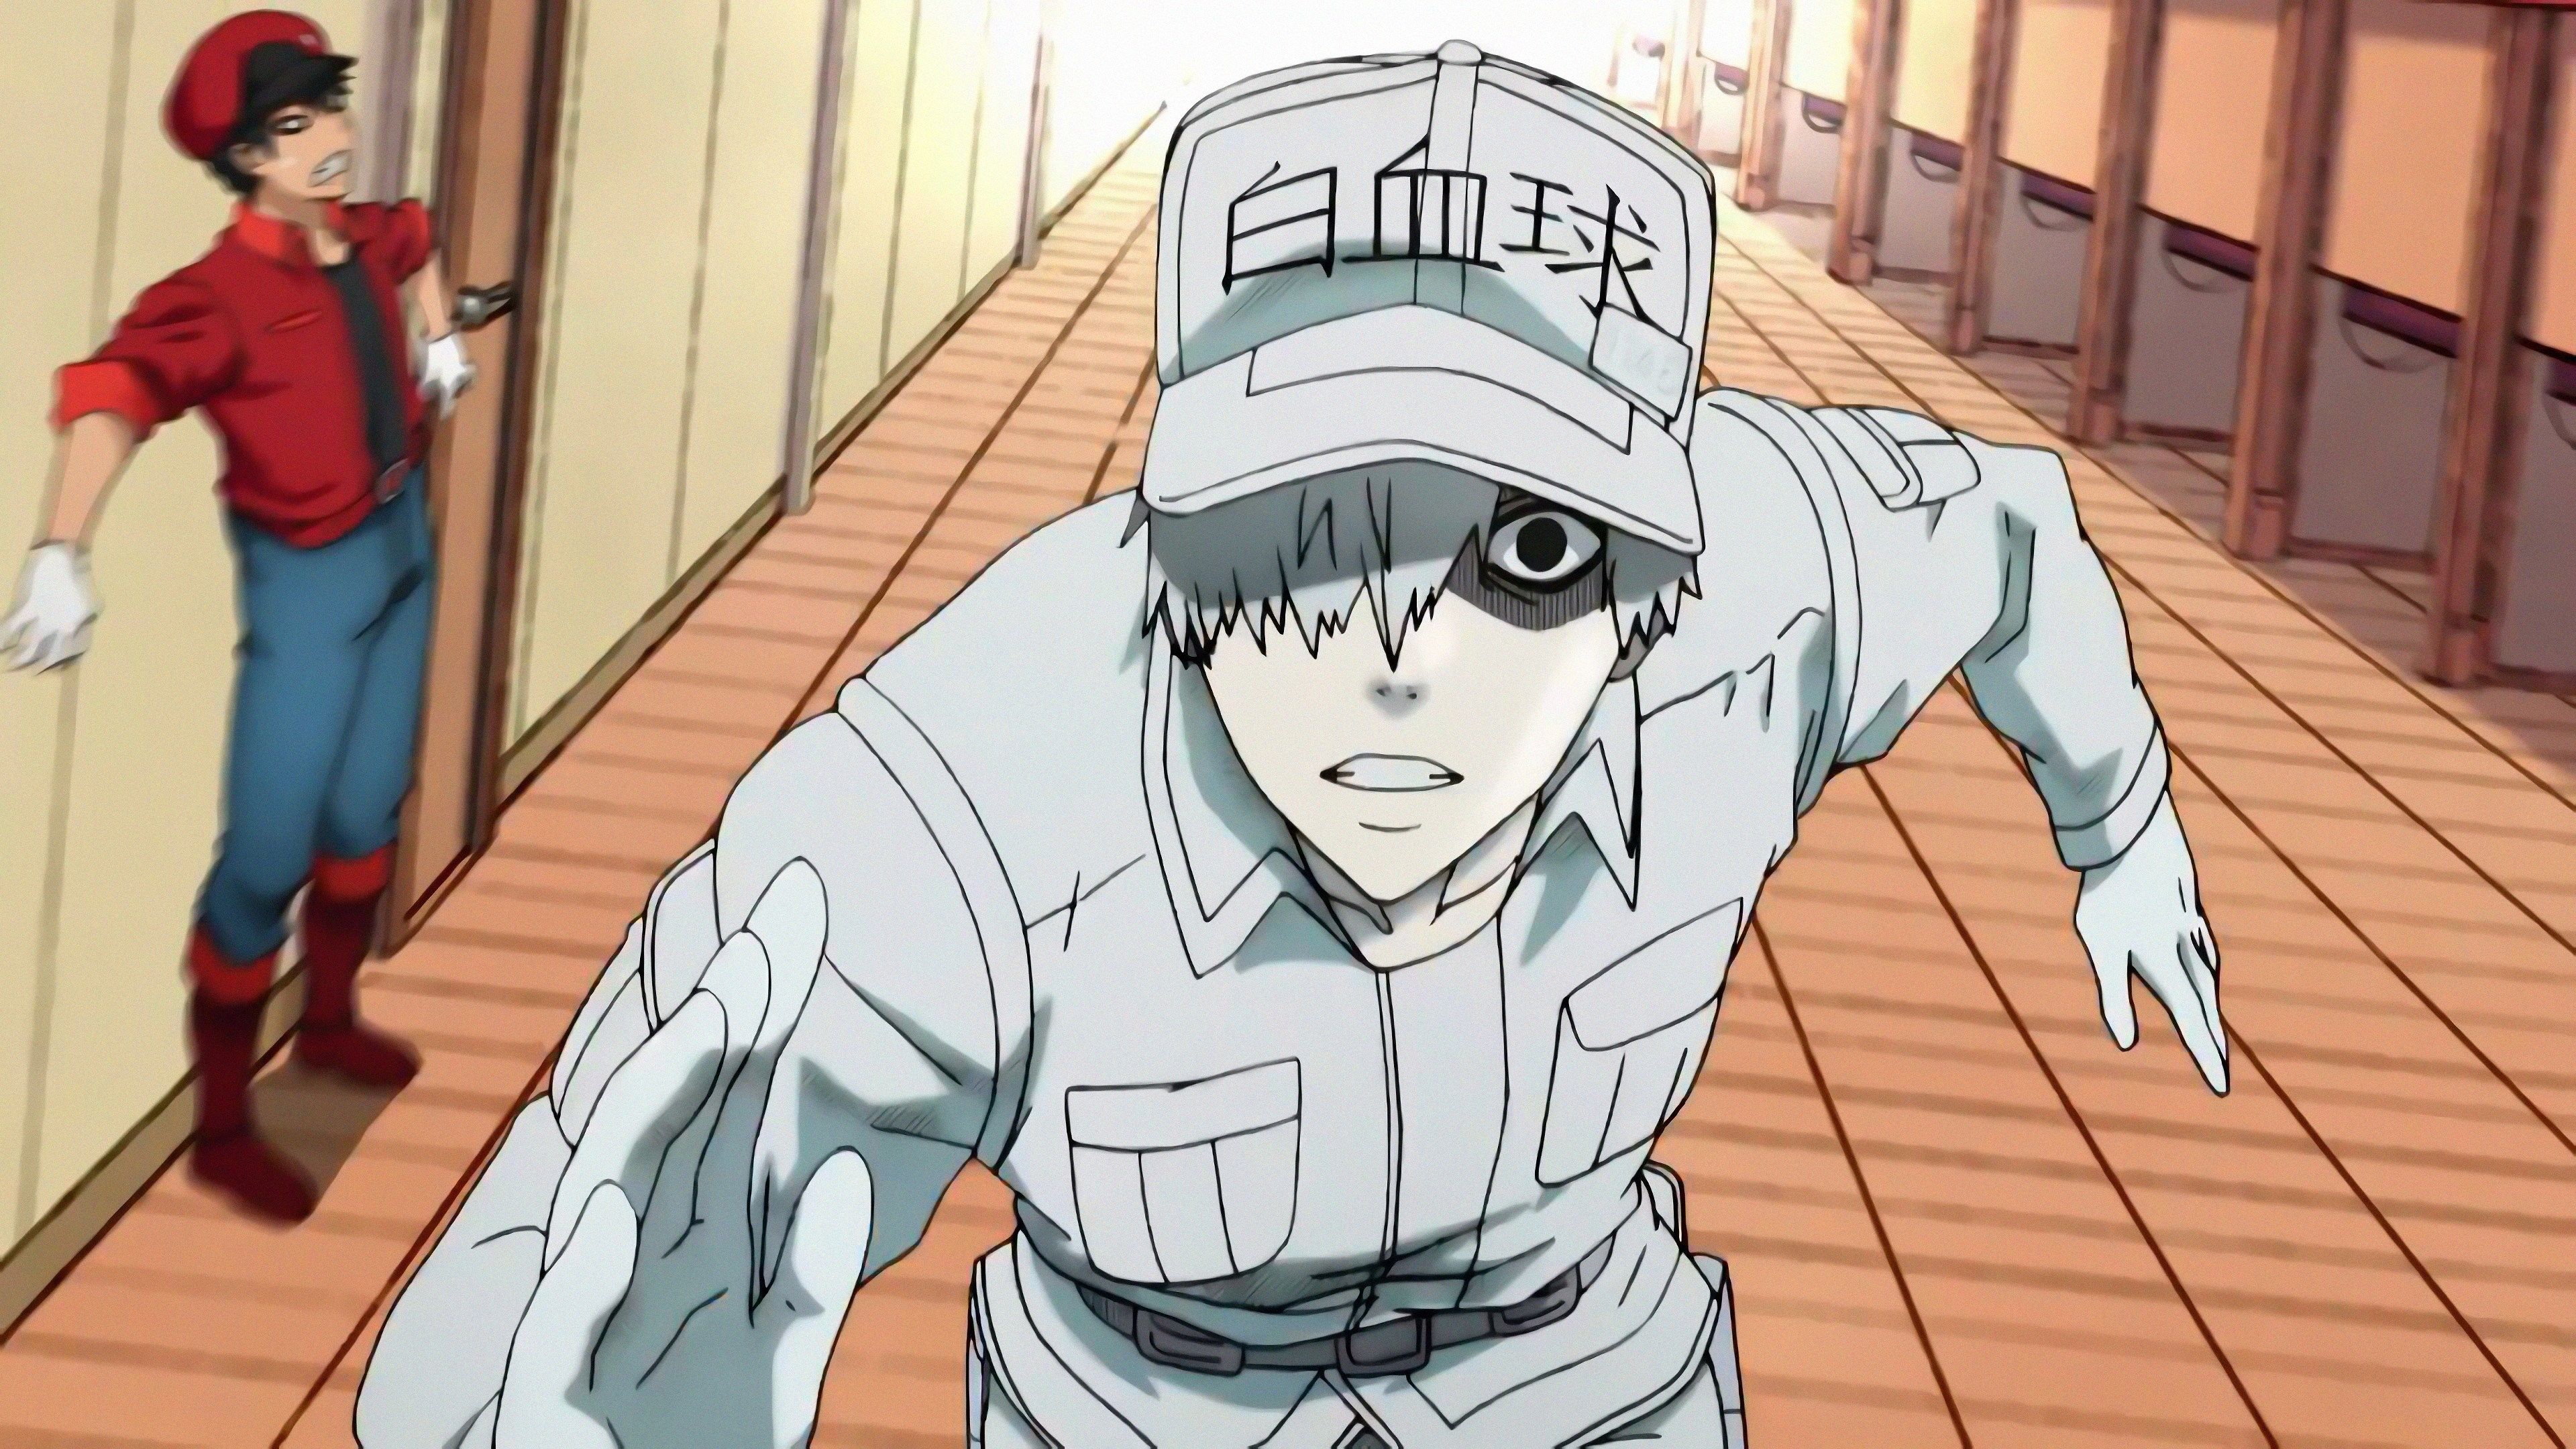 Cells at Work White Blood Cell HD 4K Wallpaper #5.3005